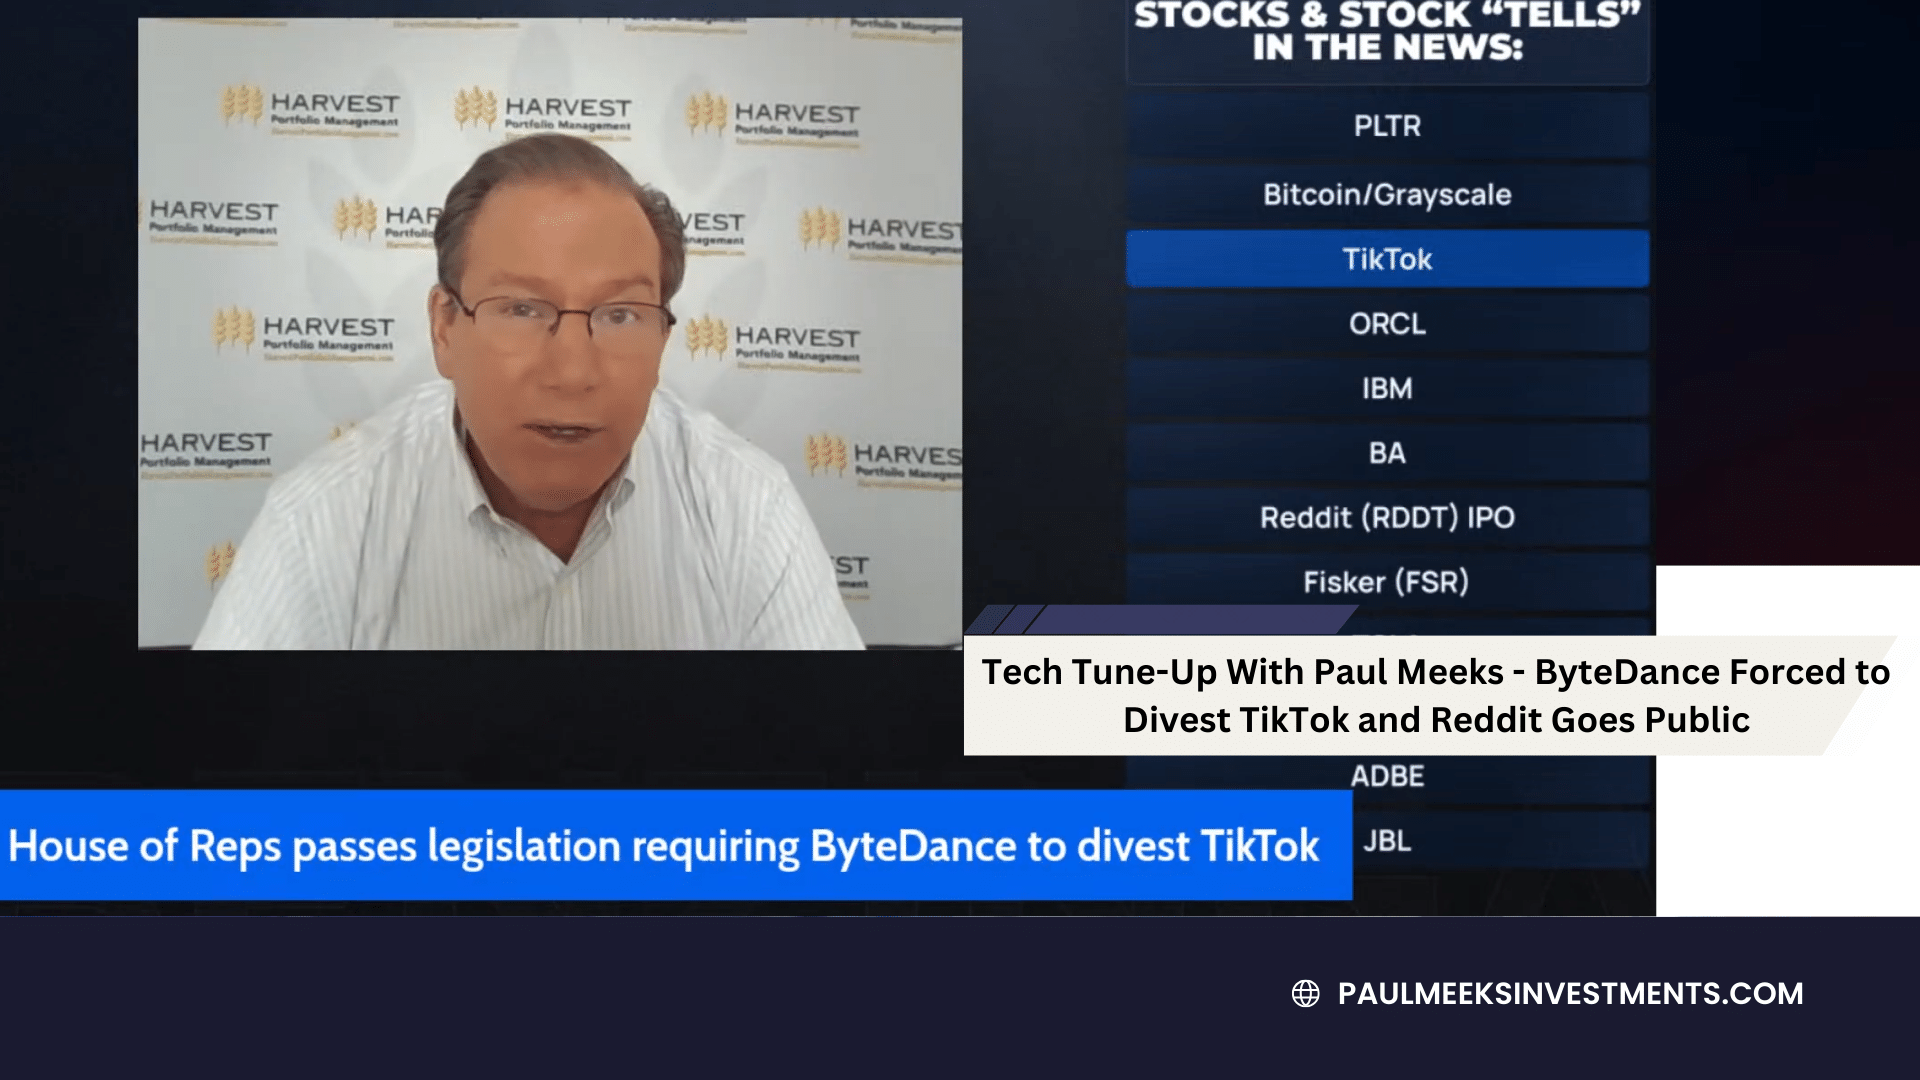 ByteDance Forced to Divest TikTok and Reddit Goes Public: Tech Tune-Up with Paul Meeks